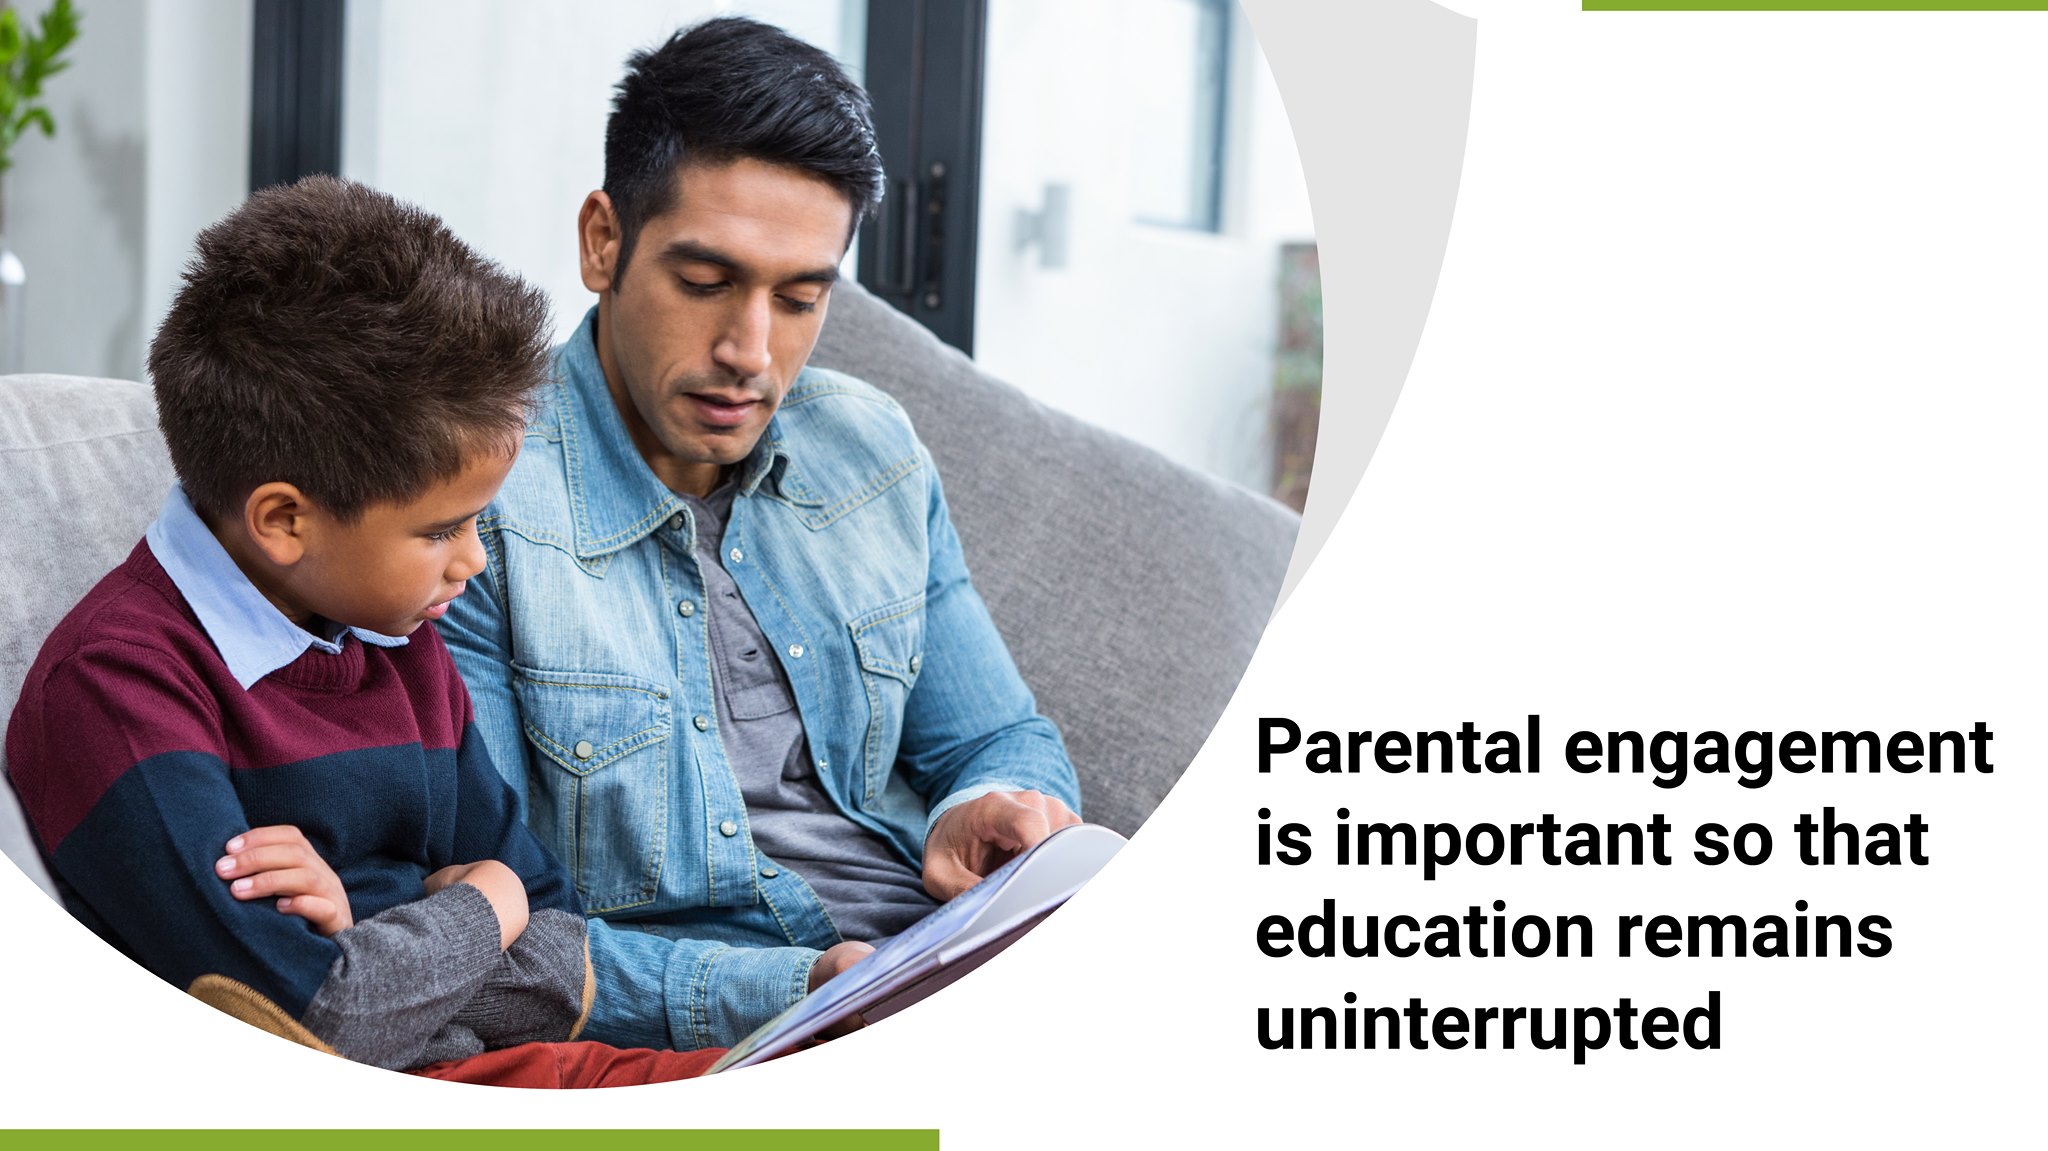  Parental engagement is important so that education remains uninterrupted